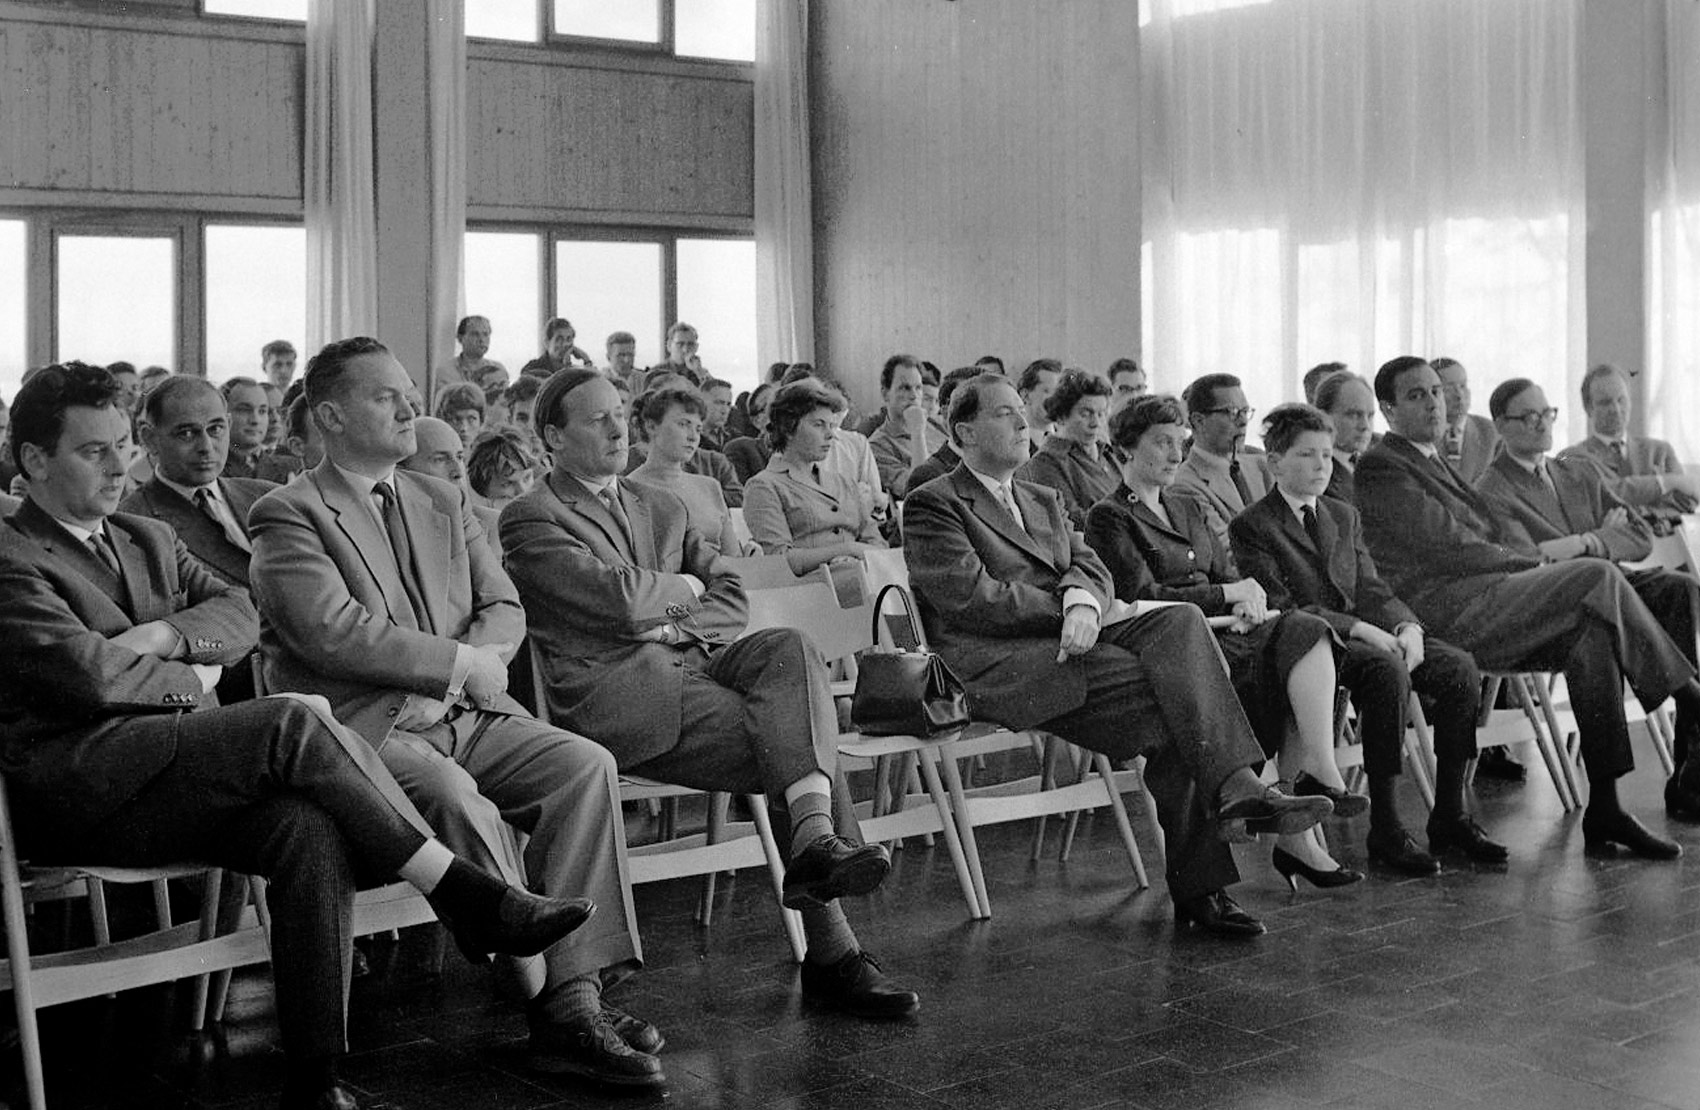 Ceremony on the occasion of the expansion of the GSS board, April 1958 